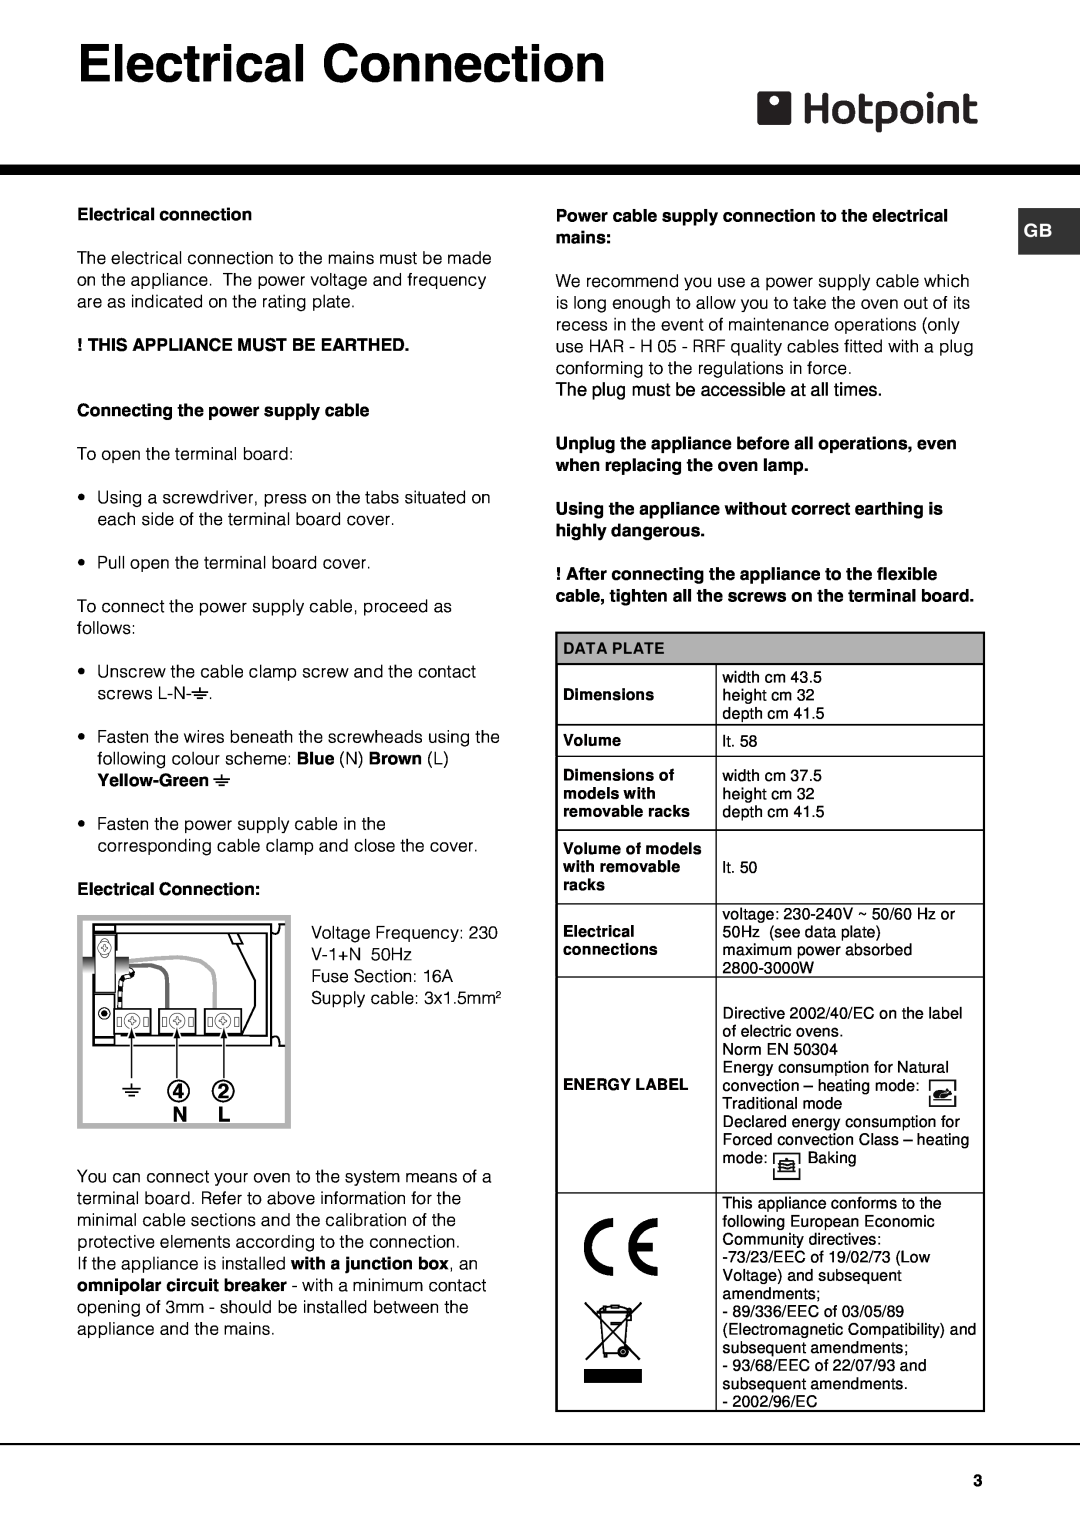 Hotpoint SQ61I manual Electrical Connection, 4 2 N L 